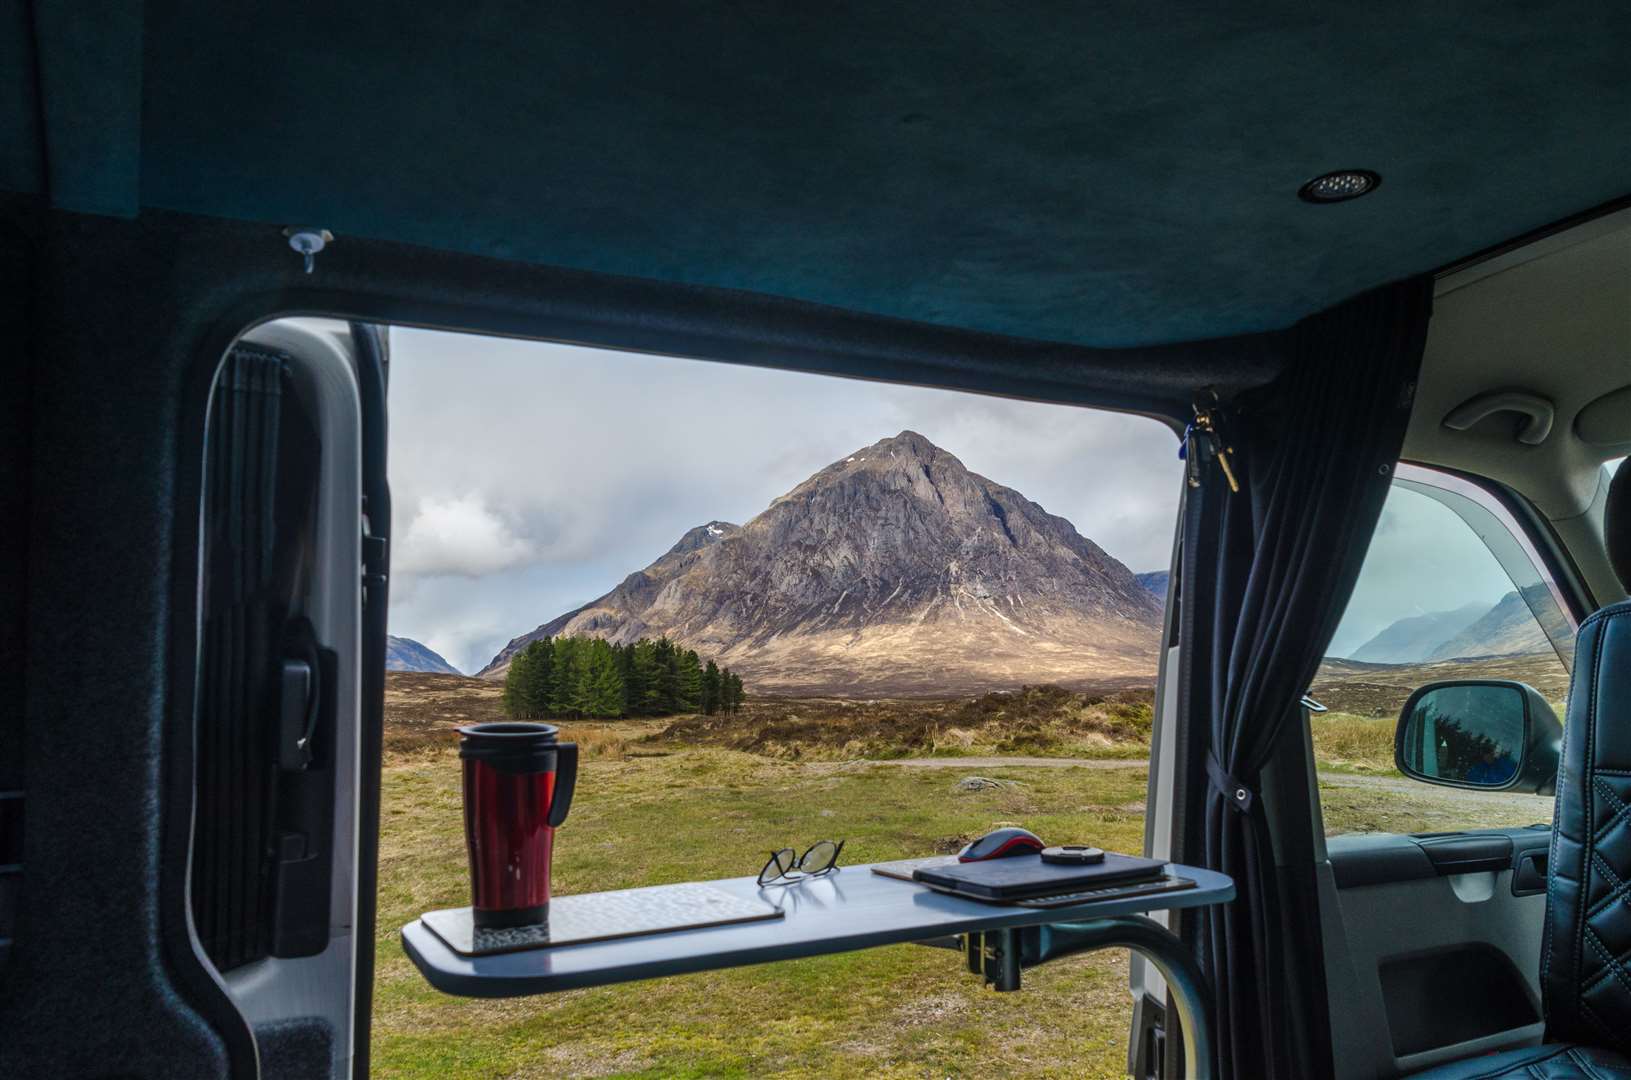 A campervan opens up a world of opportunity to explore far and wide – or even just across the Highlands.